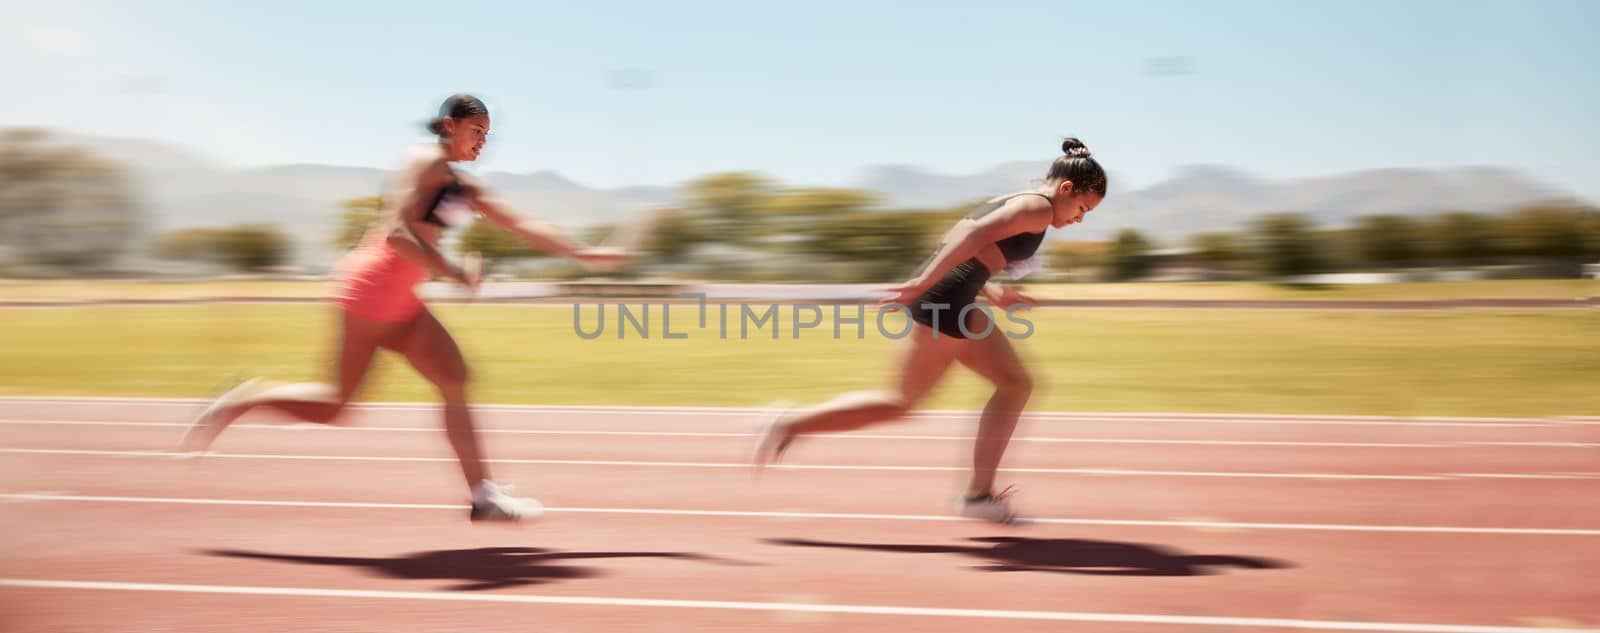 Sports, fitness and relay race with a woman athlete passing a baton to a teammate during a track race. Running, teamwork and health with a female runner and partner racing for competitive sport.